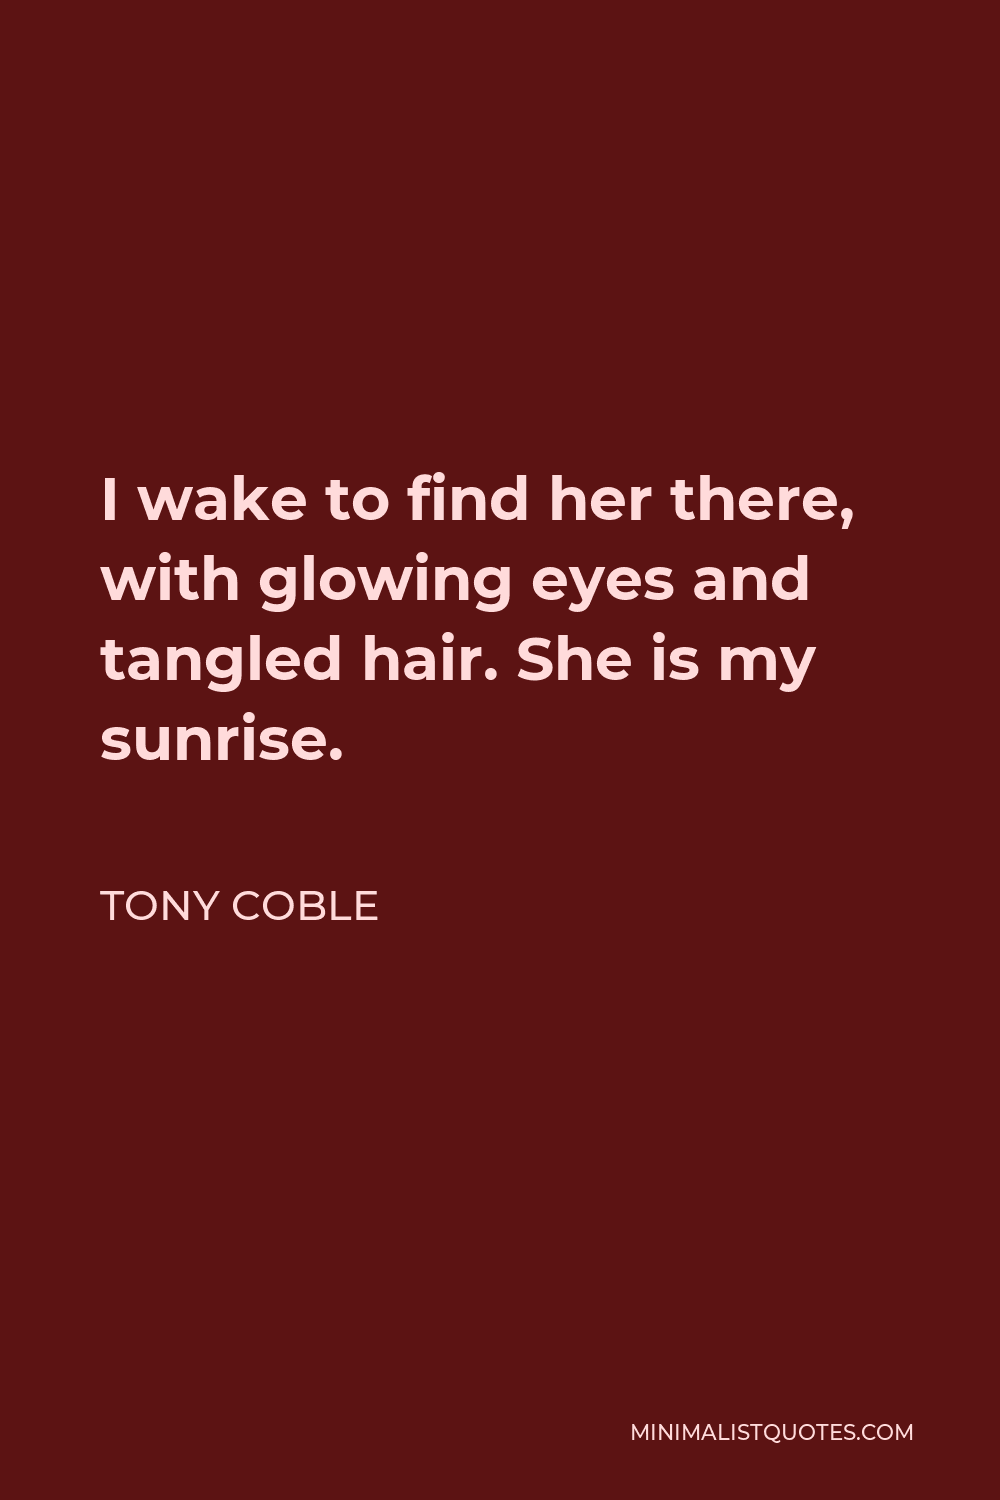 Tony Coble Quote - I wake to find her there, with glowing eyes and tangled hair. She is my sunrise.